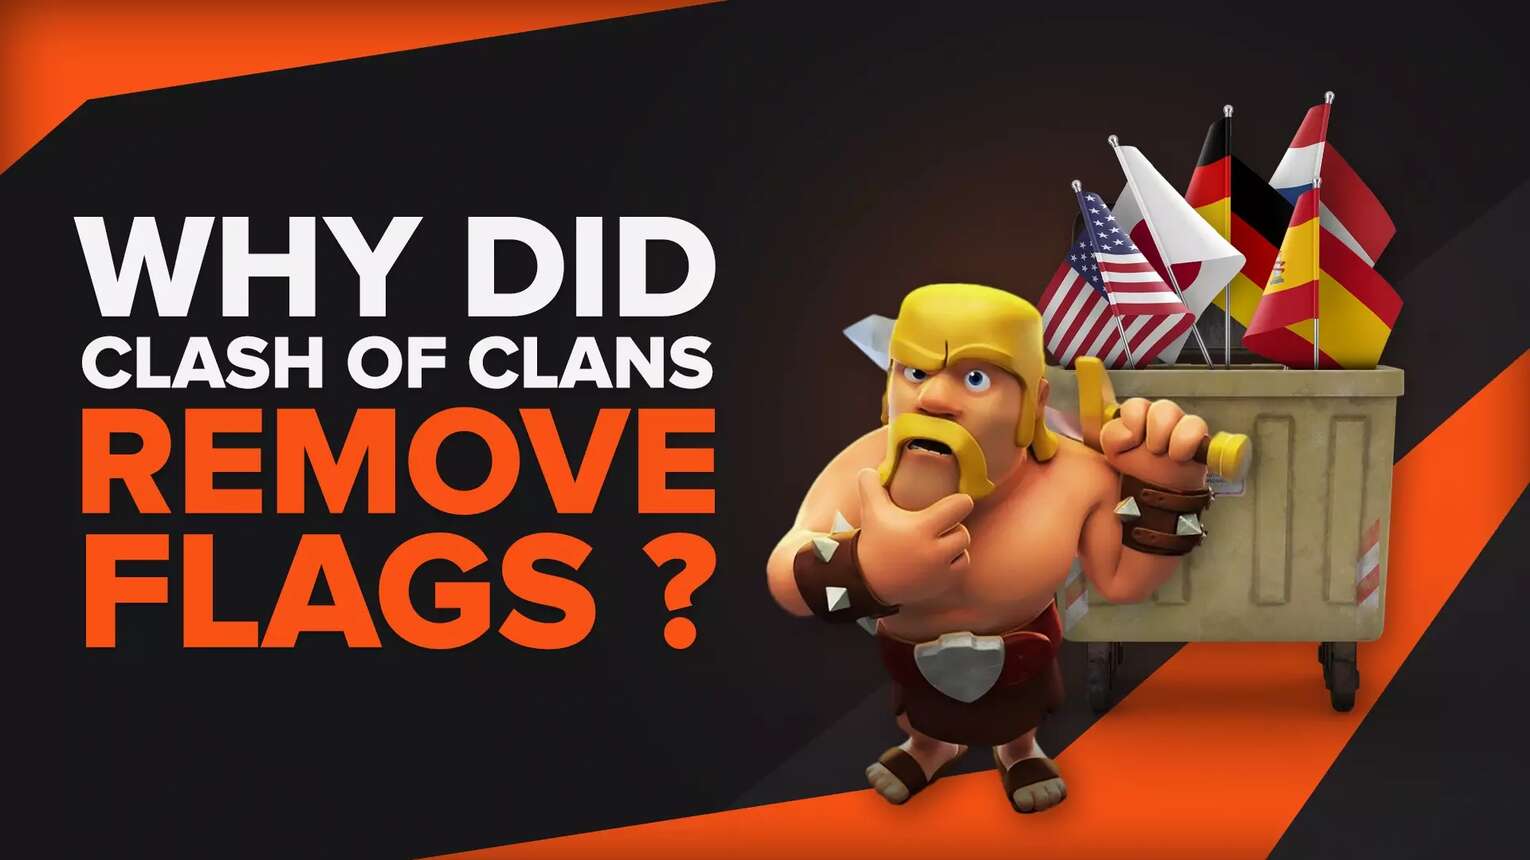 National Flags Have Been Removed in Clash Of Clans, But Why?